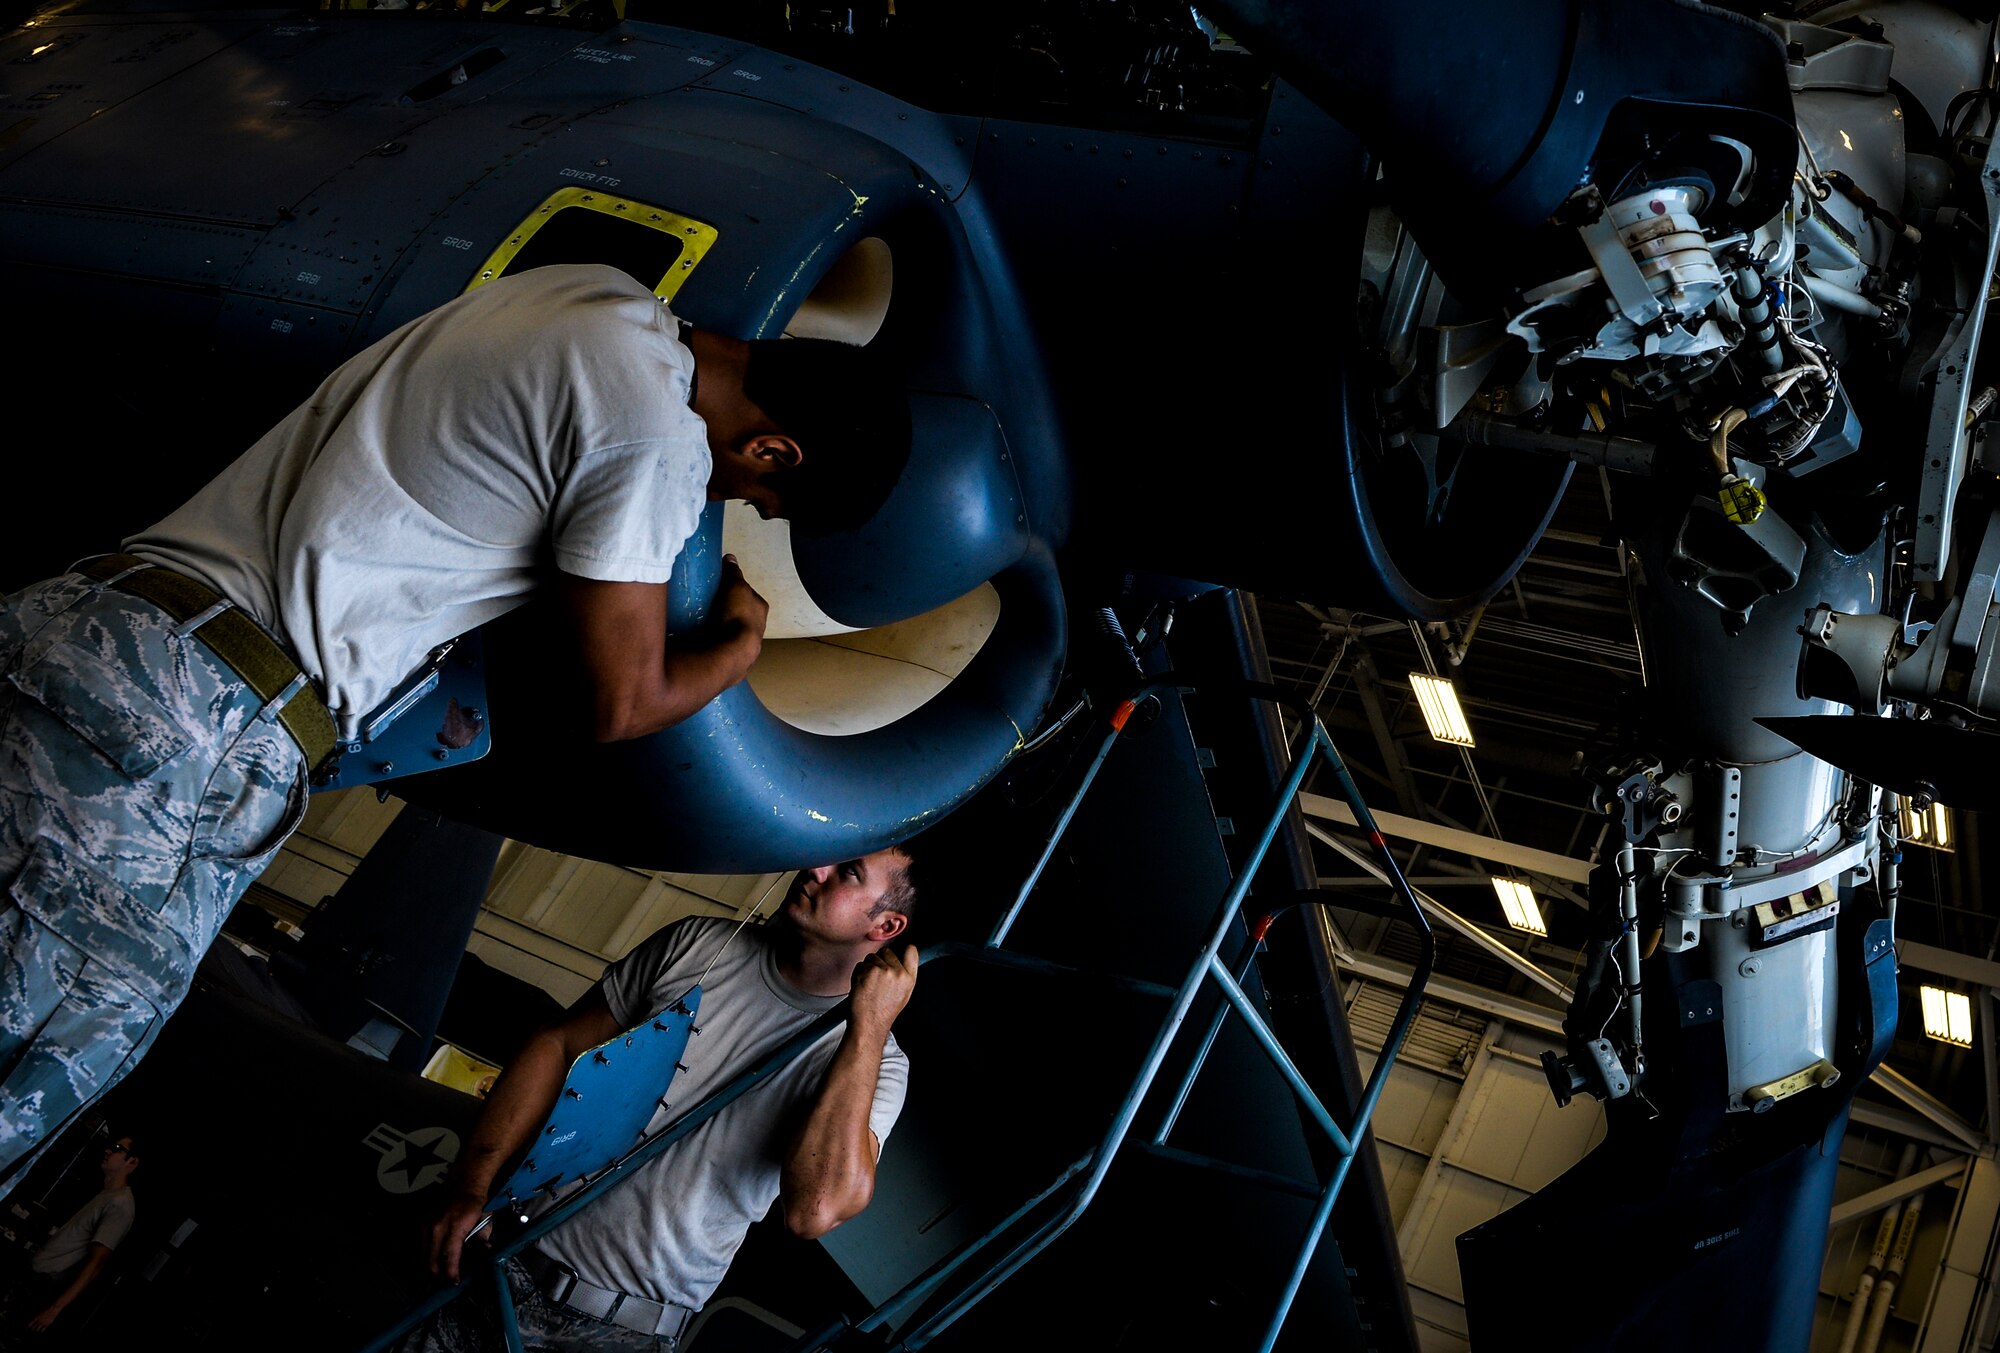 Senior Airman Richard Kodama, 8th Aircraft Maintenance Unit crew chief and Senior Airman Chad Pearsall, 8th AMU crew chief, work together to prepare a CV-22 Osprey engine for inspection on Hurlburt Field, Fla., Aug. 8, 2014. The 8th AMU is part of the 801st Special Operations Maintenance Squadron that performs all equipment maintenance in support of worldwide special operations missions. (U.S. Air Force photo/Senior Airman Christopher Callaway) 